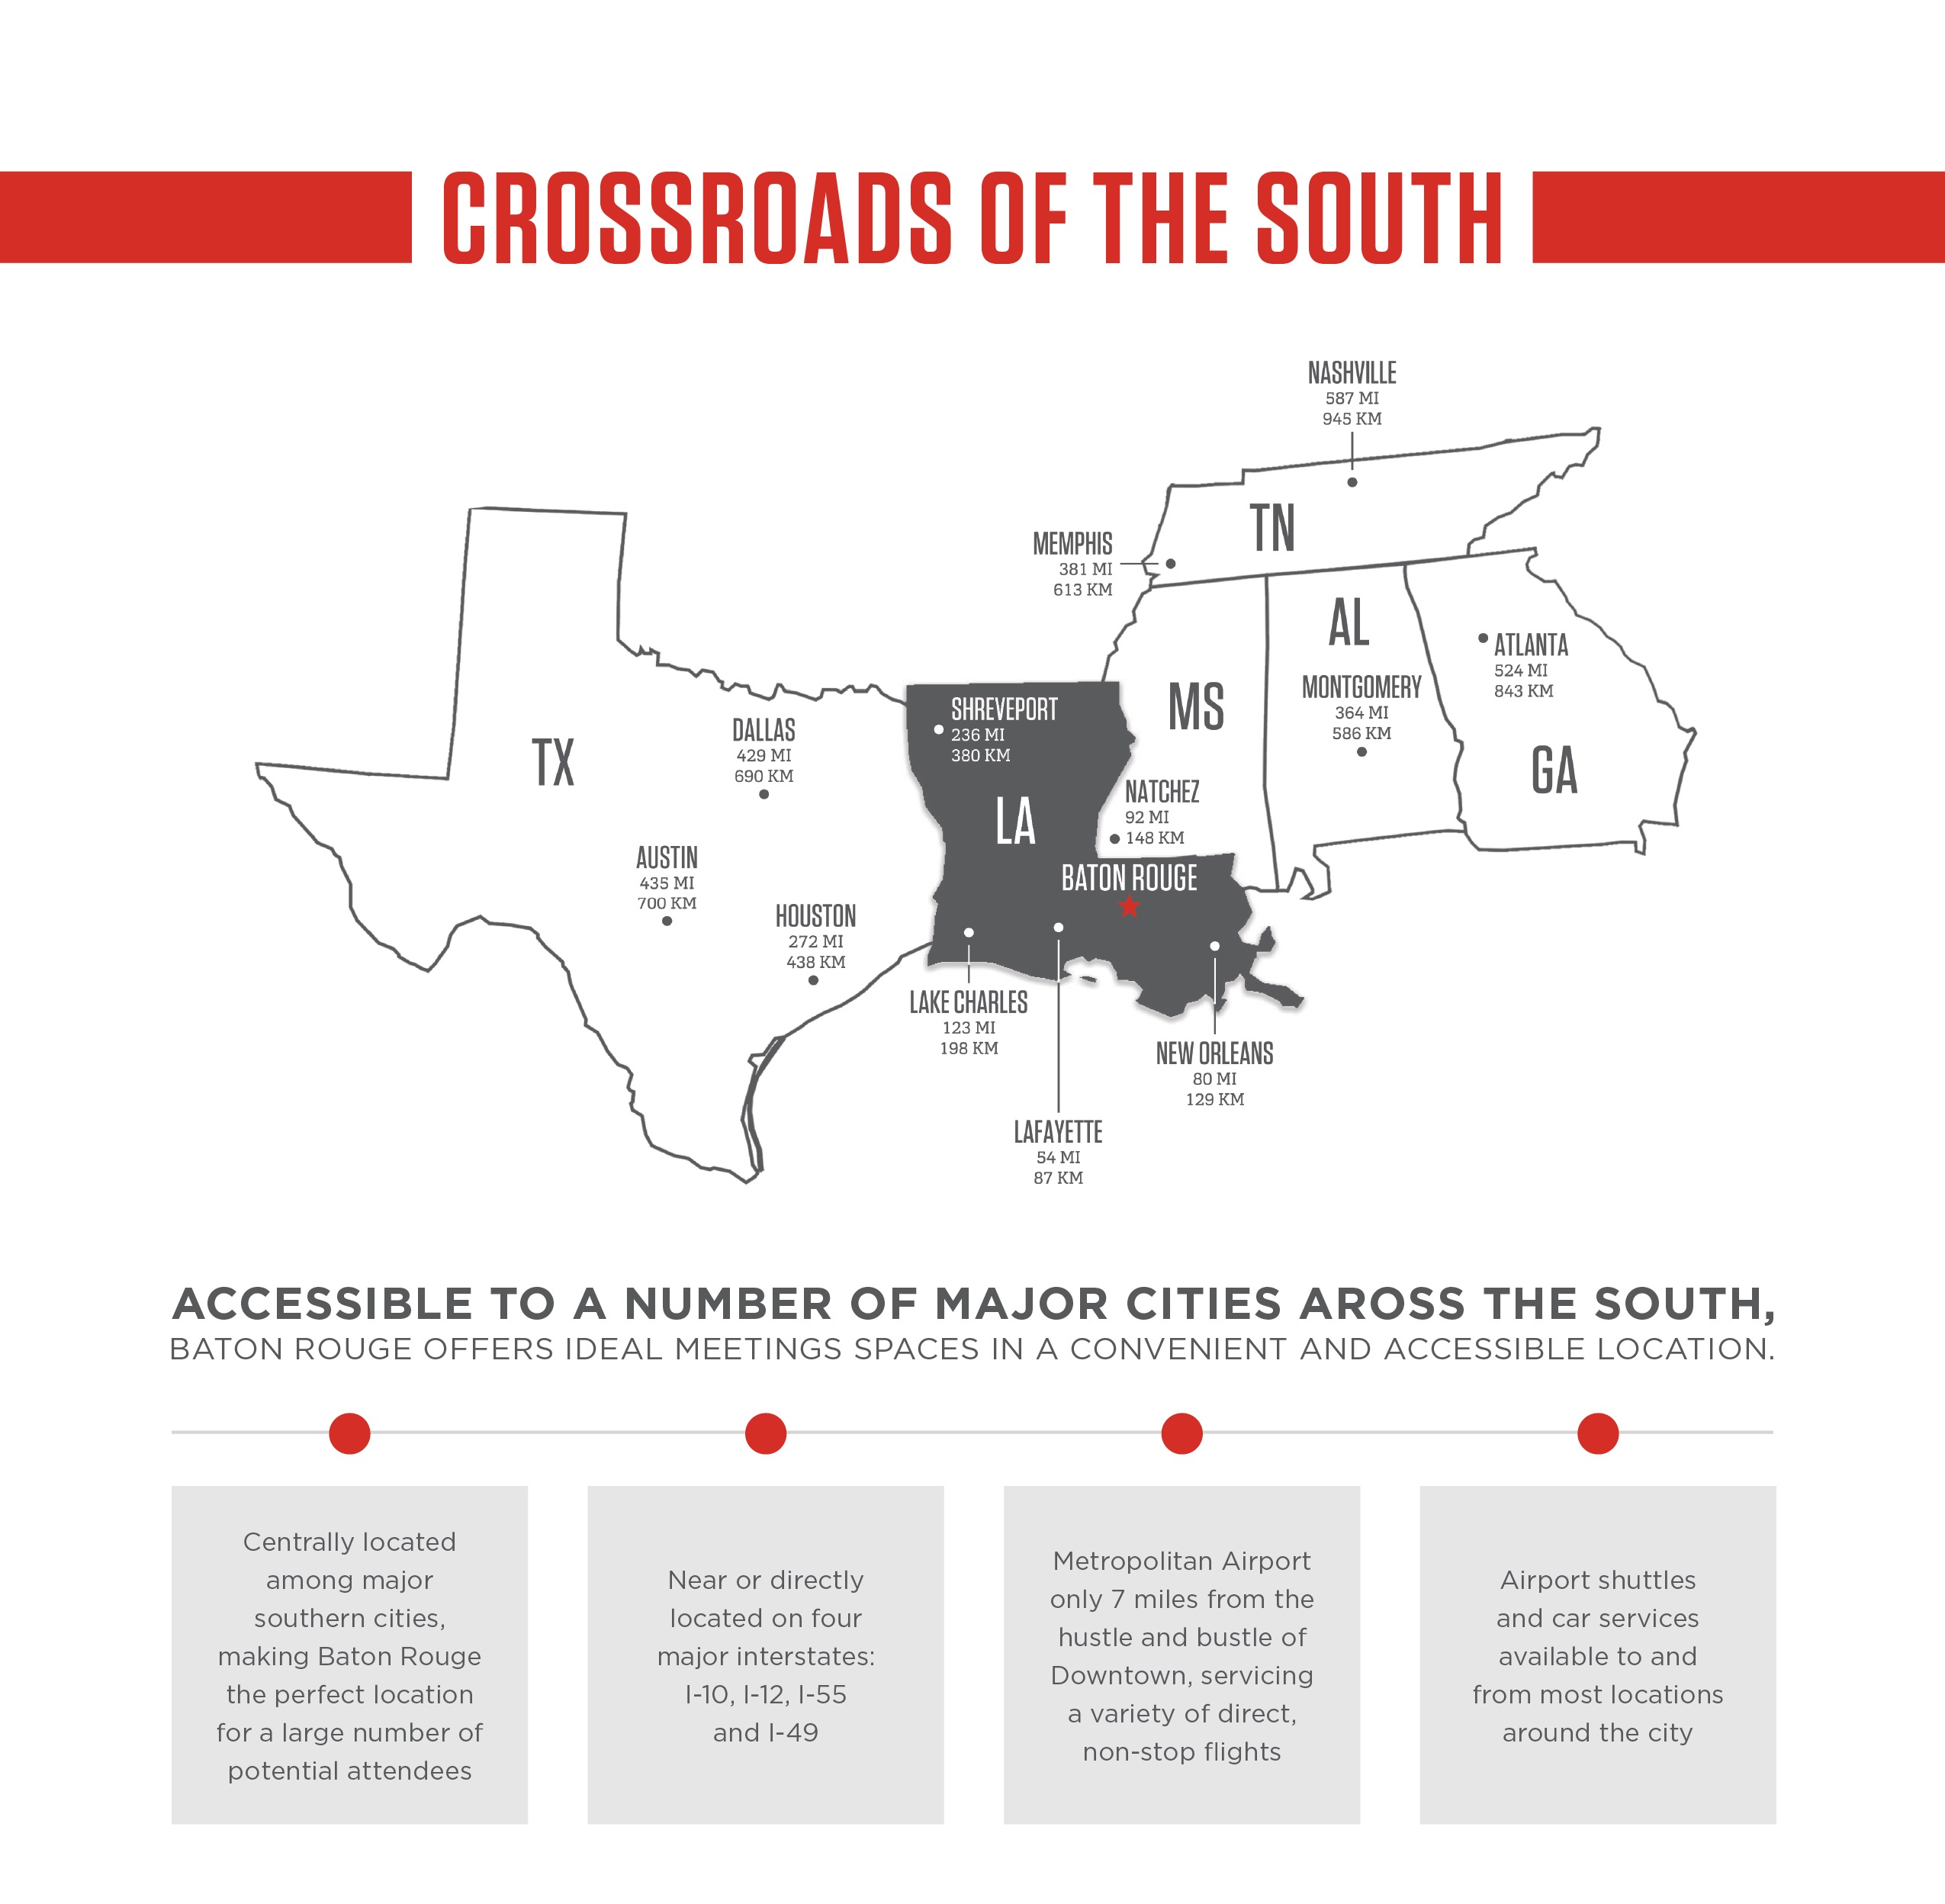 Crossroads of the South